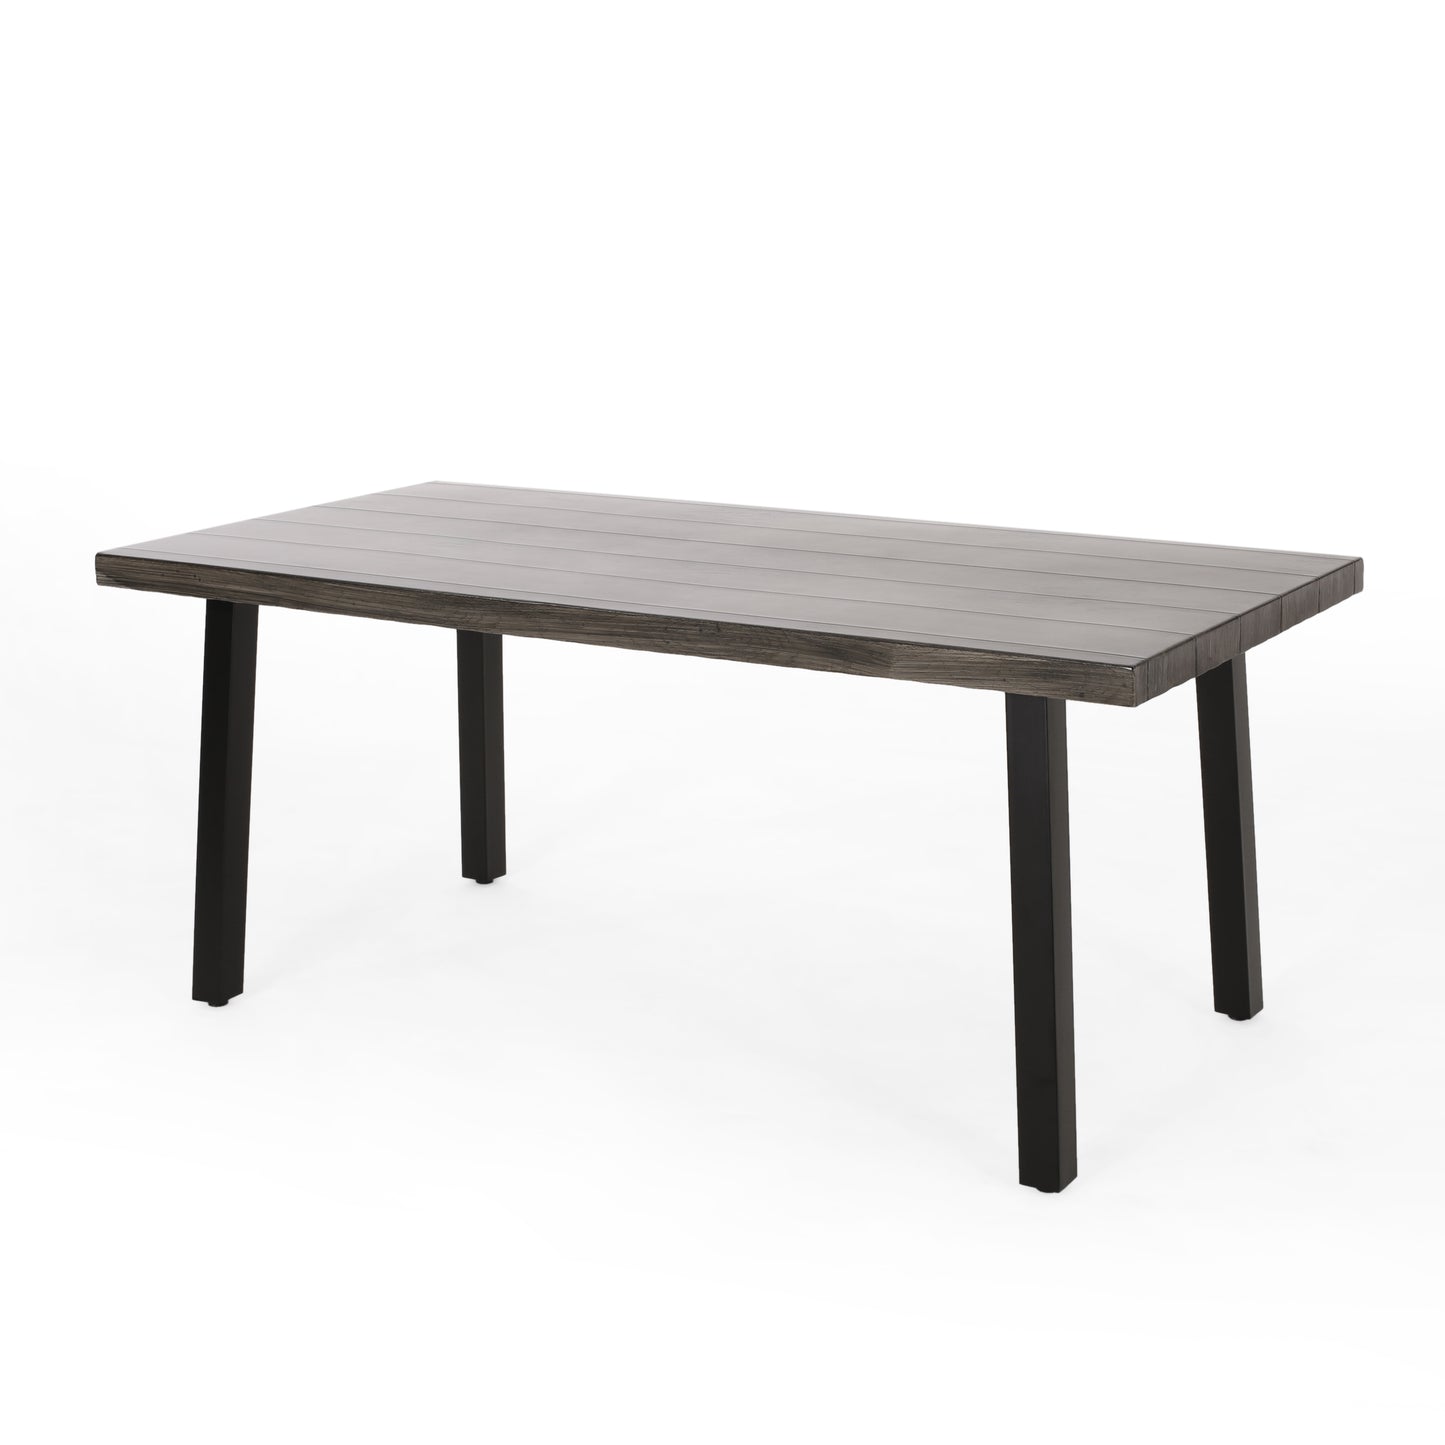 Altair Outdoor Modern Industrial Aluminum Dining Table